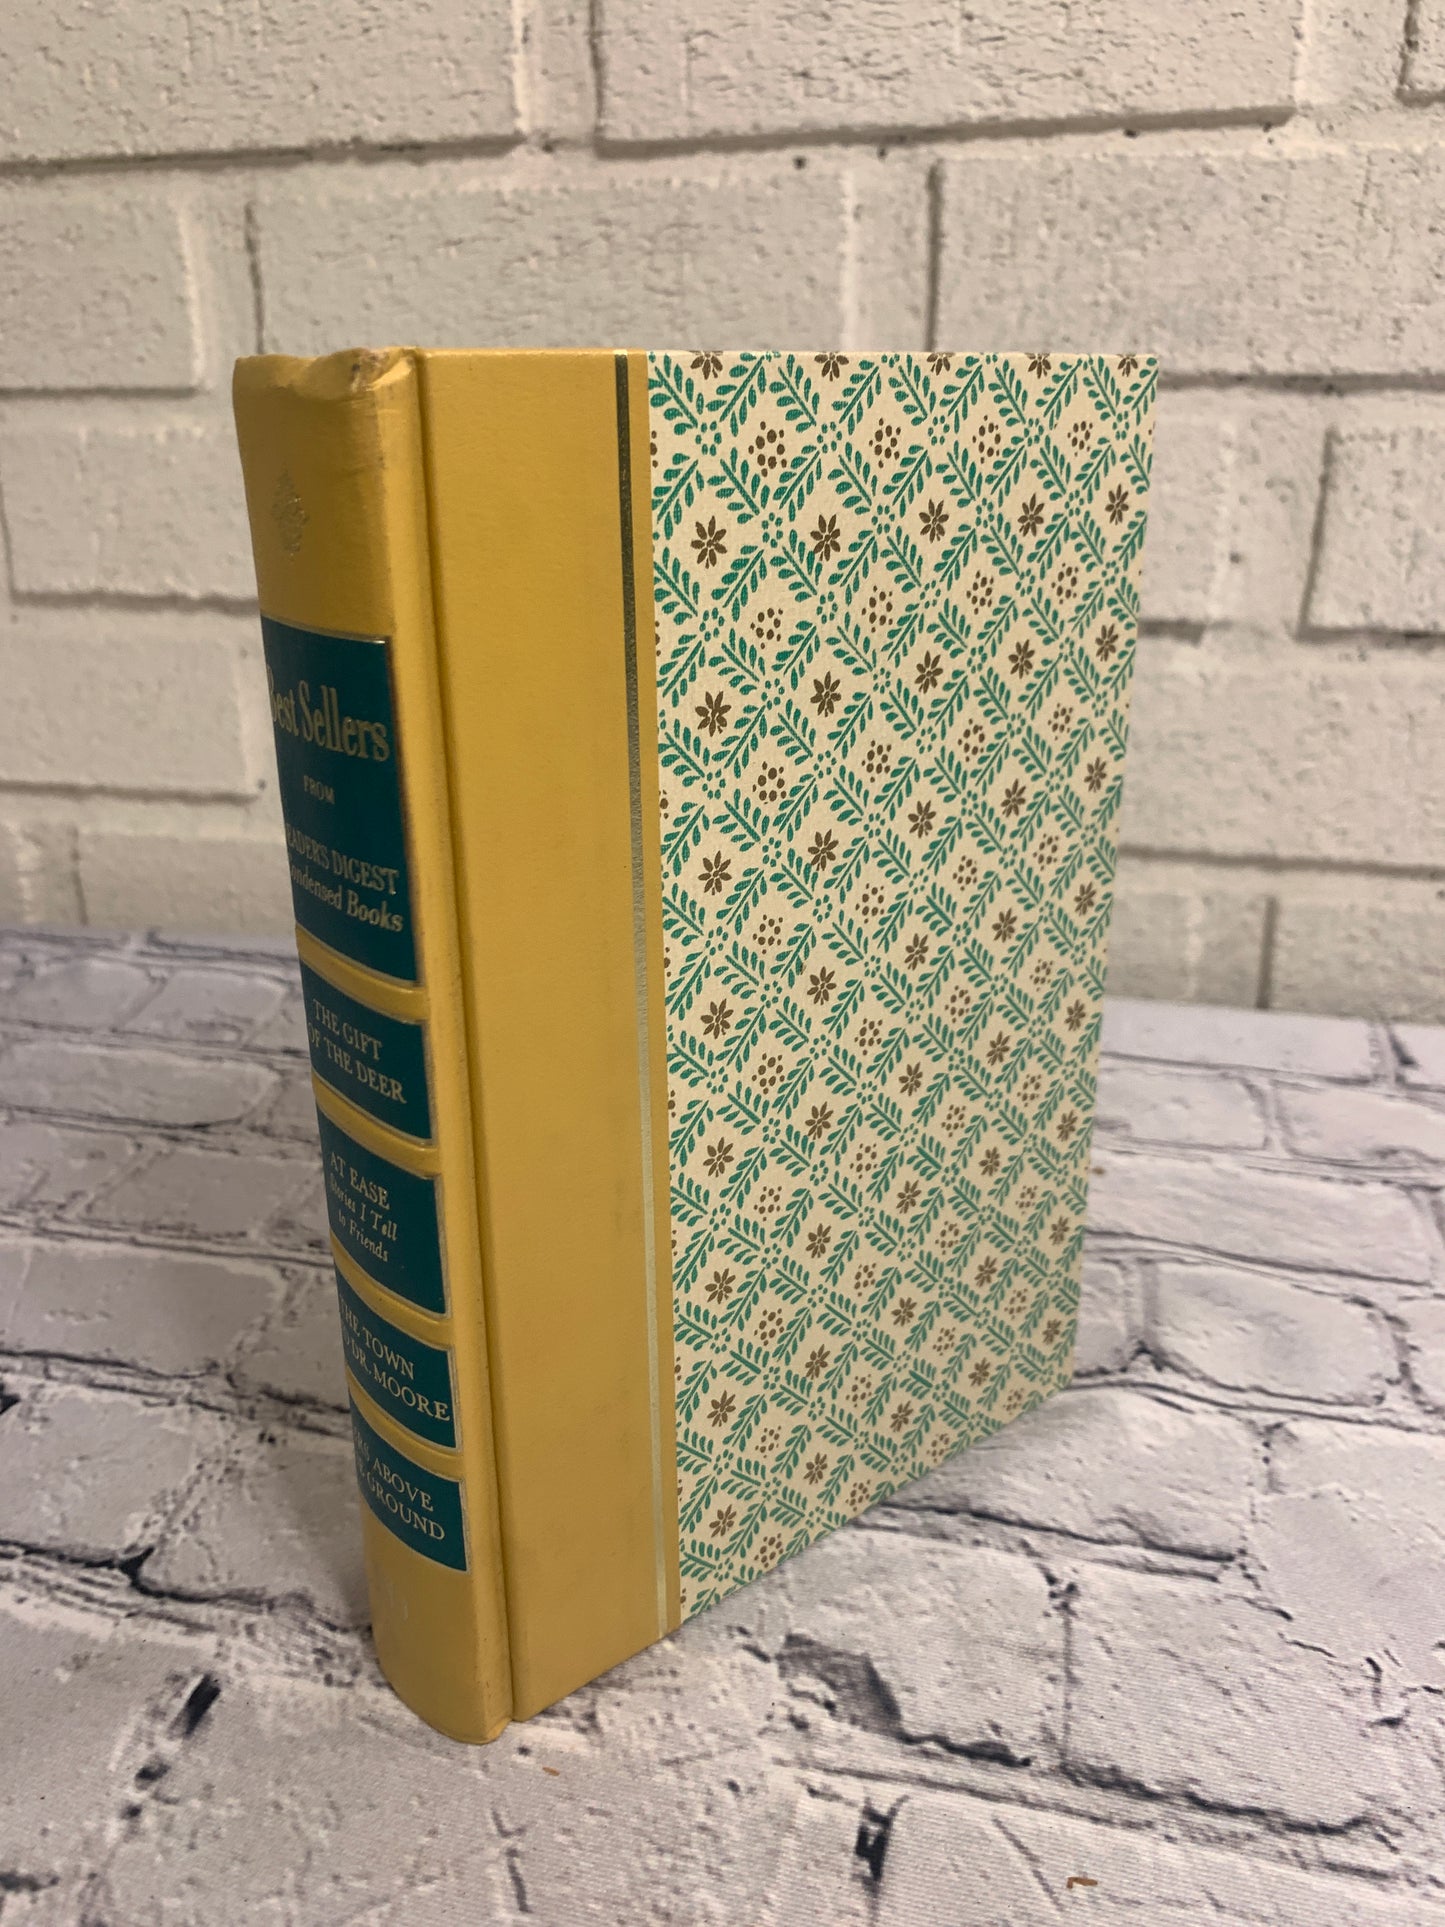 Best Sellers from Reader's Digest Condensed Books [1968 1st Ed.]